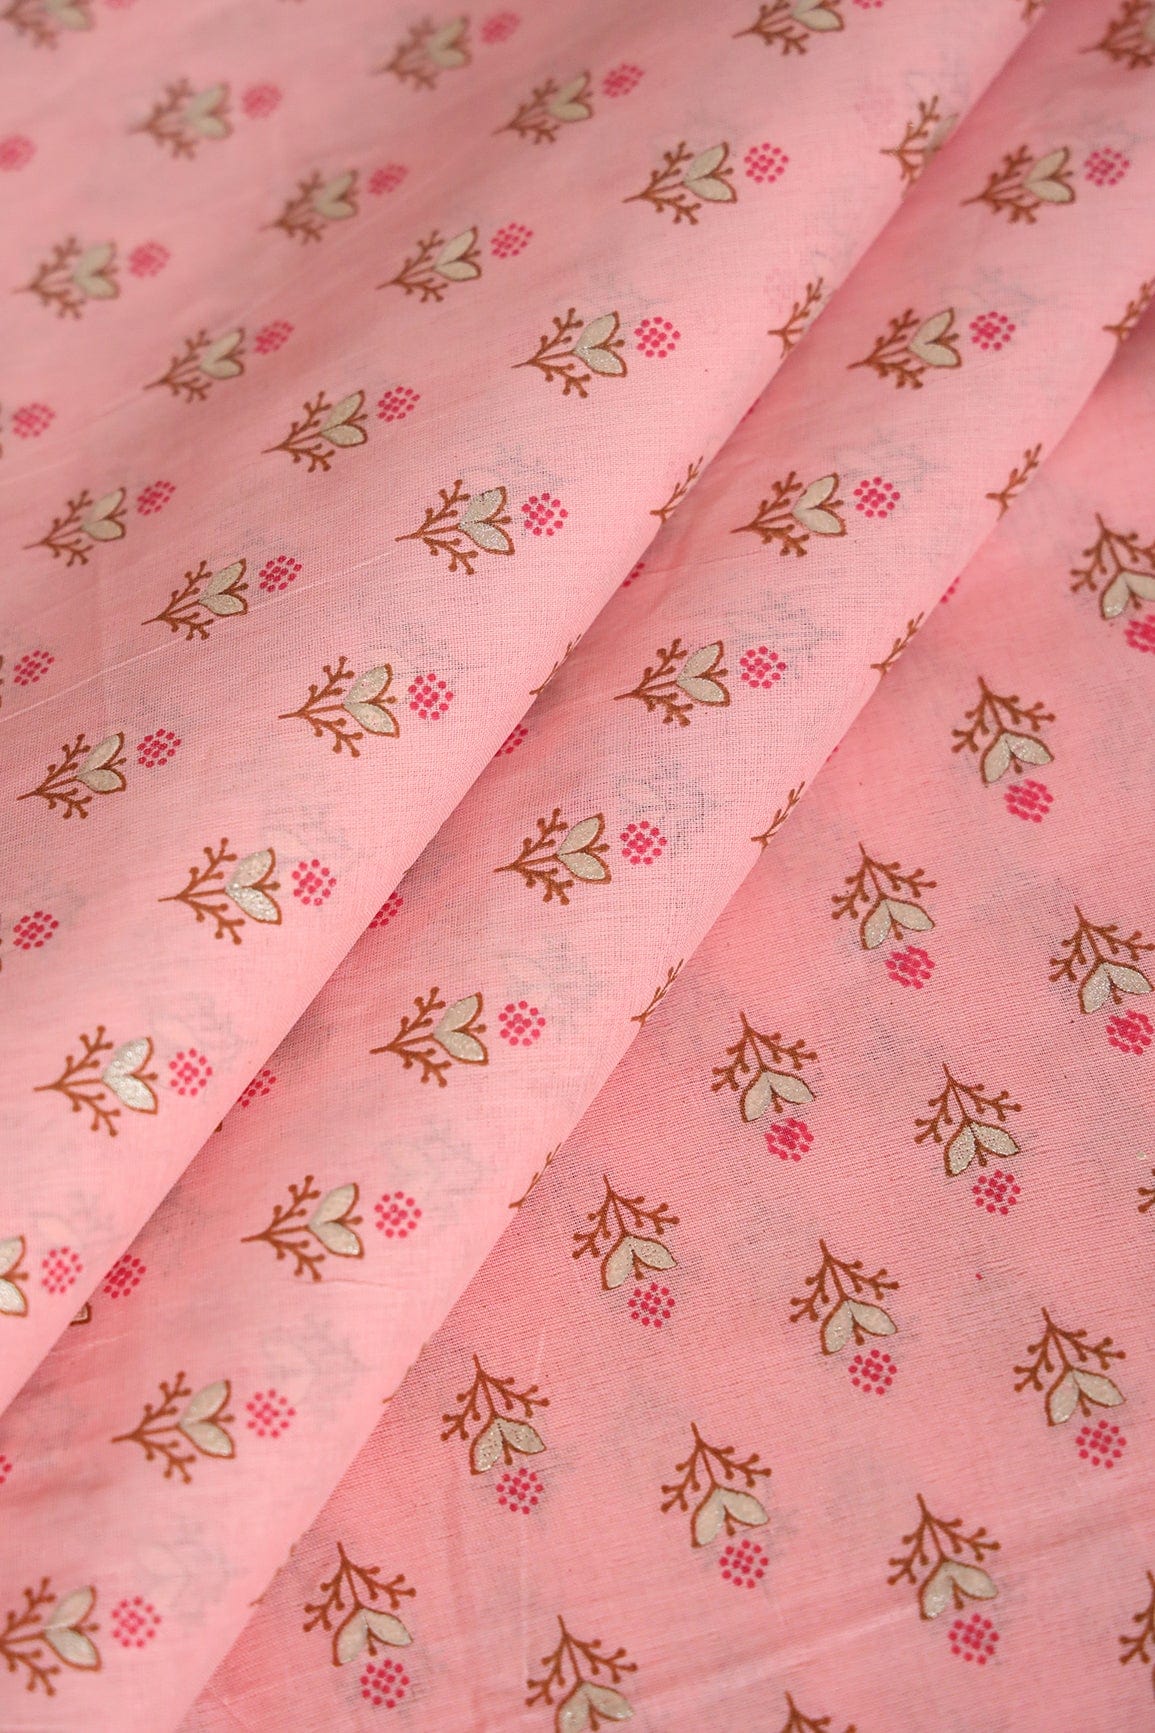 doeraa Prints Dark Pink And Brown Small Floral Booti Foil Print On Pink Organic Cotton Fabric